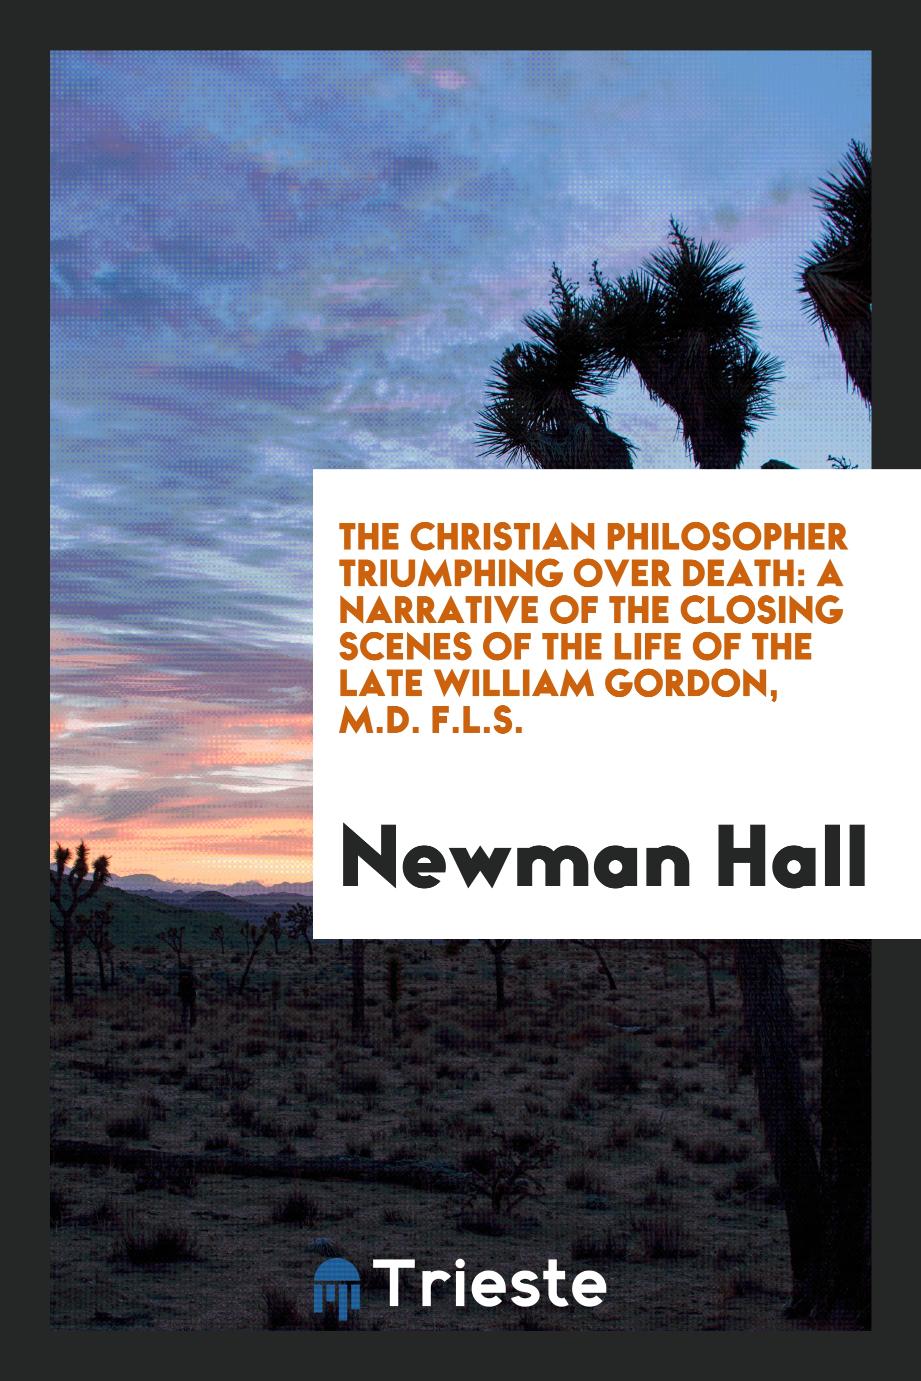 The Christian Philosopher Triumphing Over Death: A Narrative of the Closing Scenes of the Life of the Late William Gordon, M.D. F.L.S.